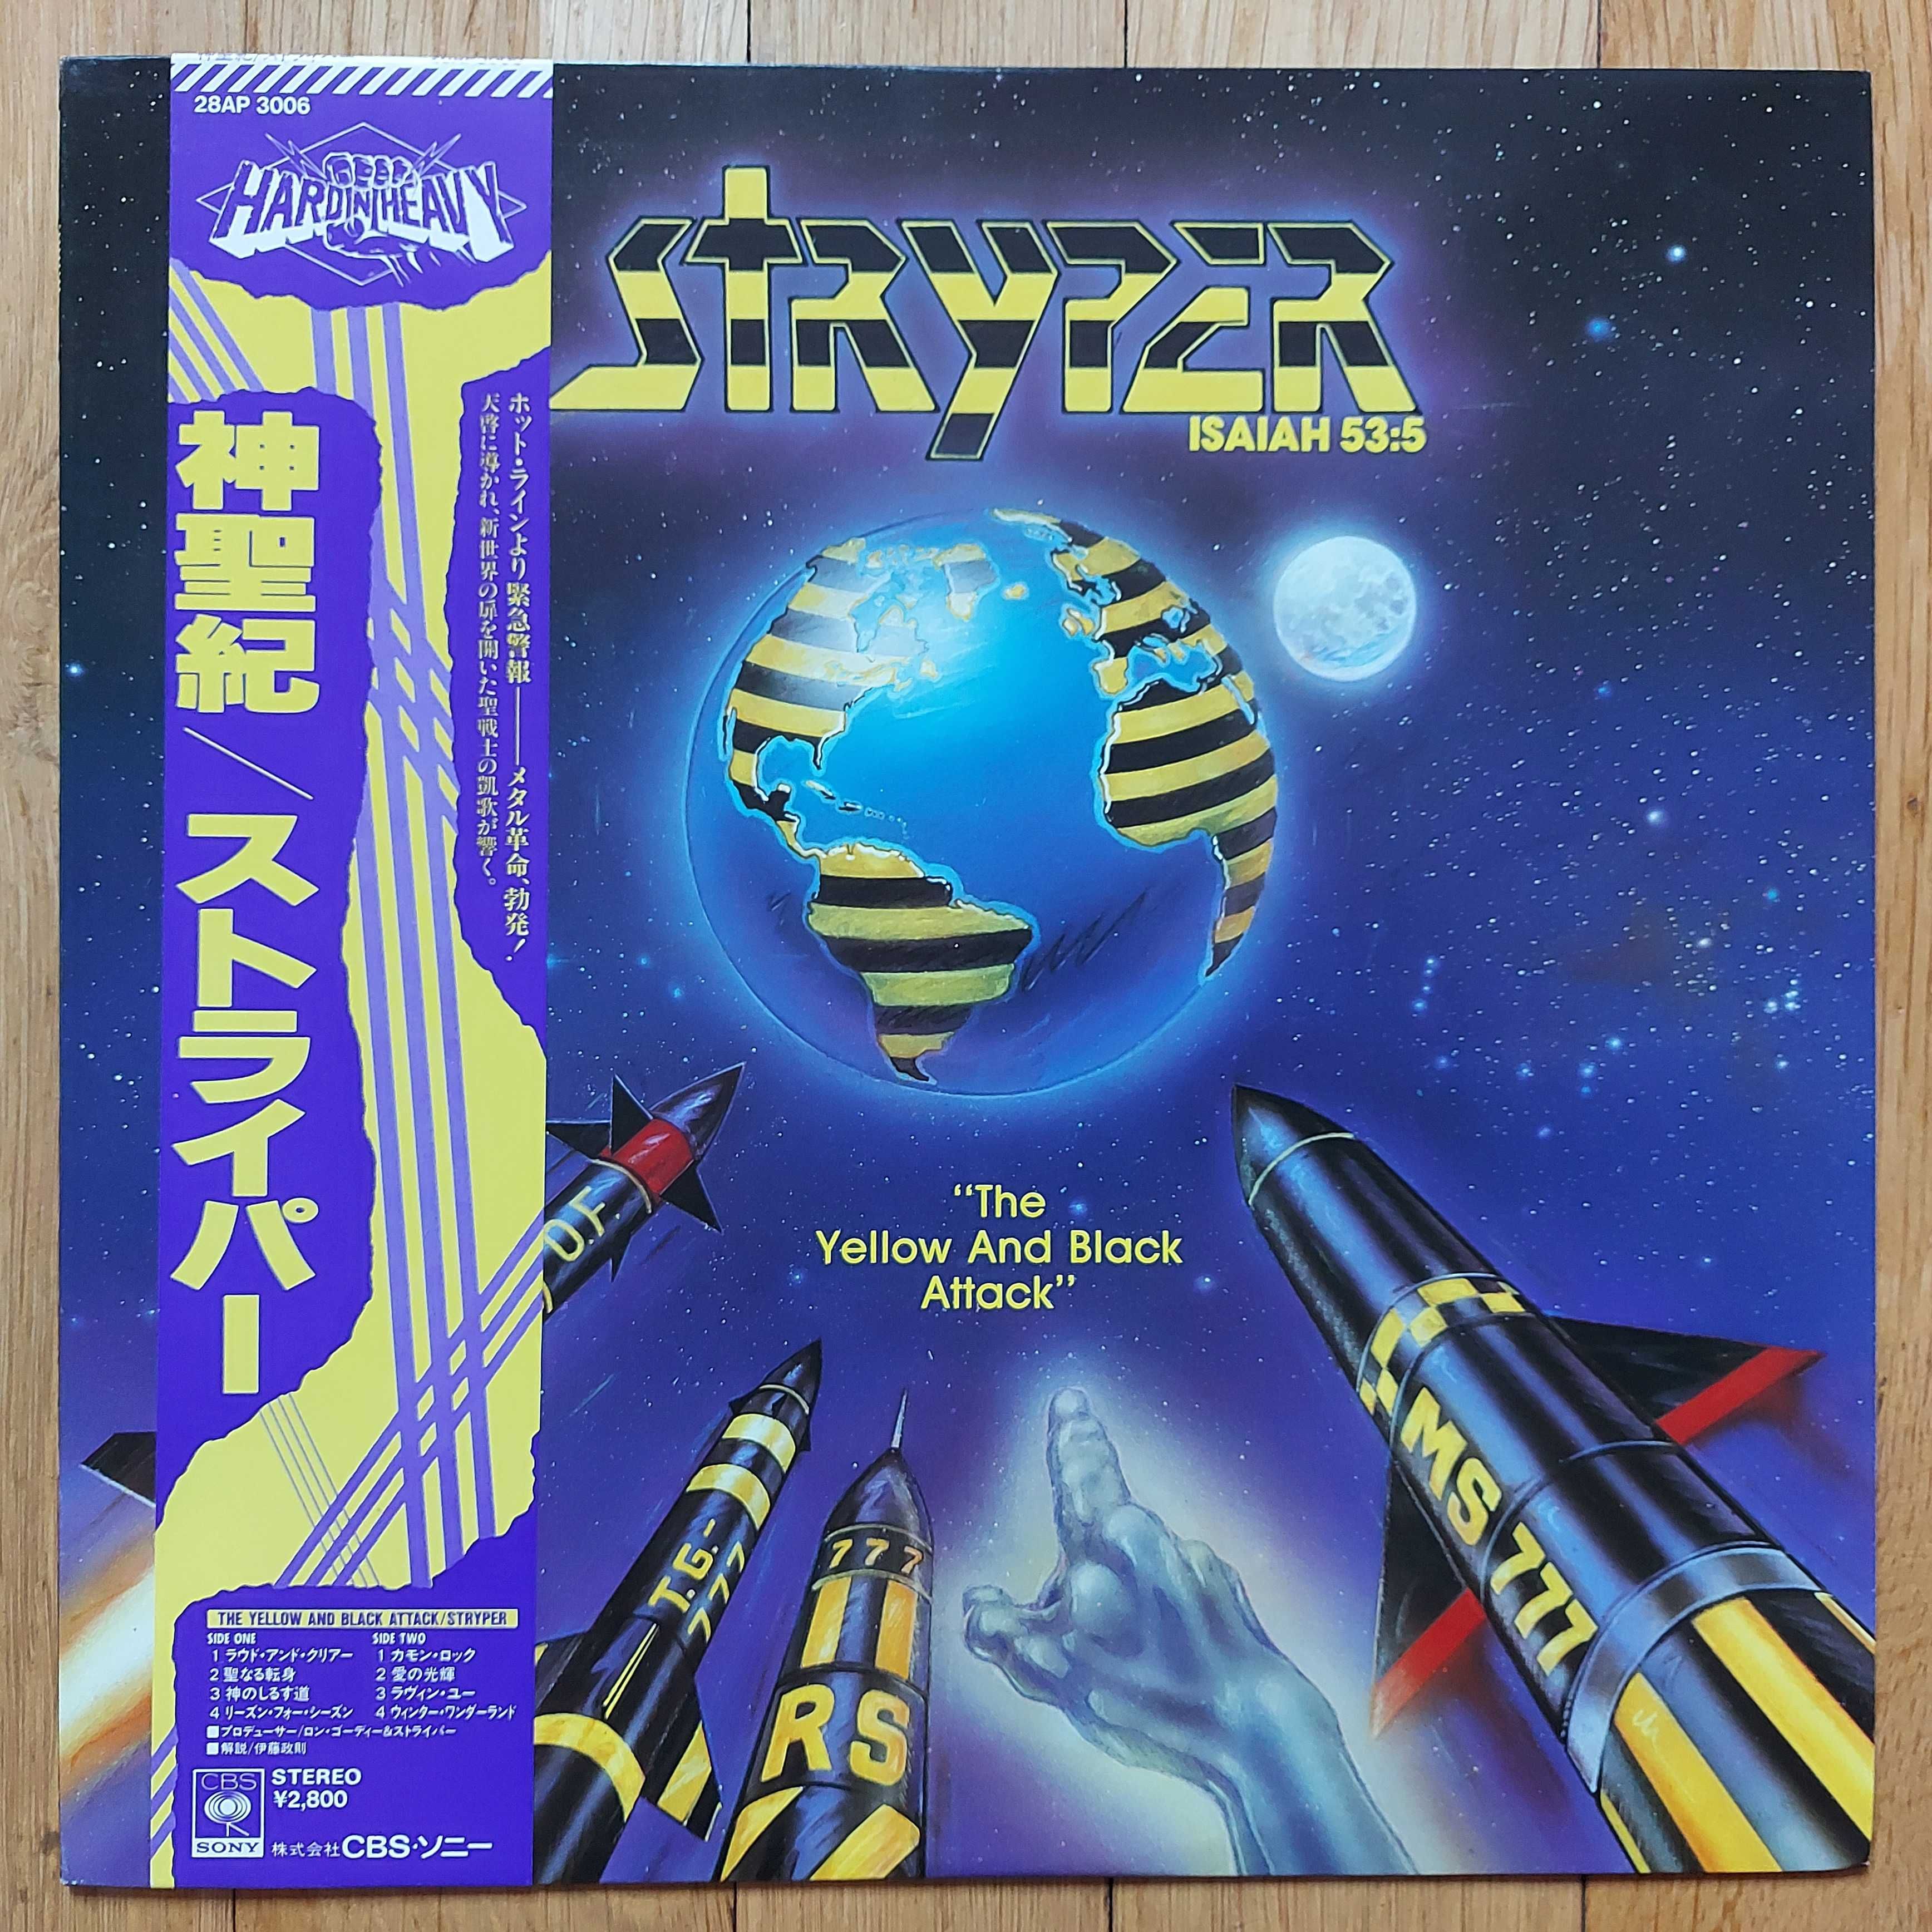 Stryper ‎The Yellow And Black Attack   21 Mar, 1985  Japan (NM/NM)